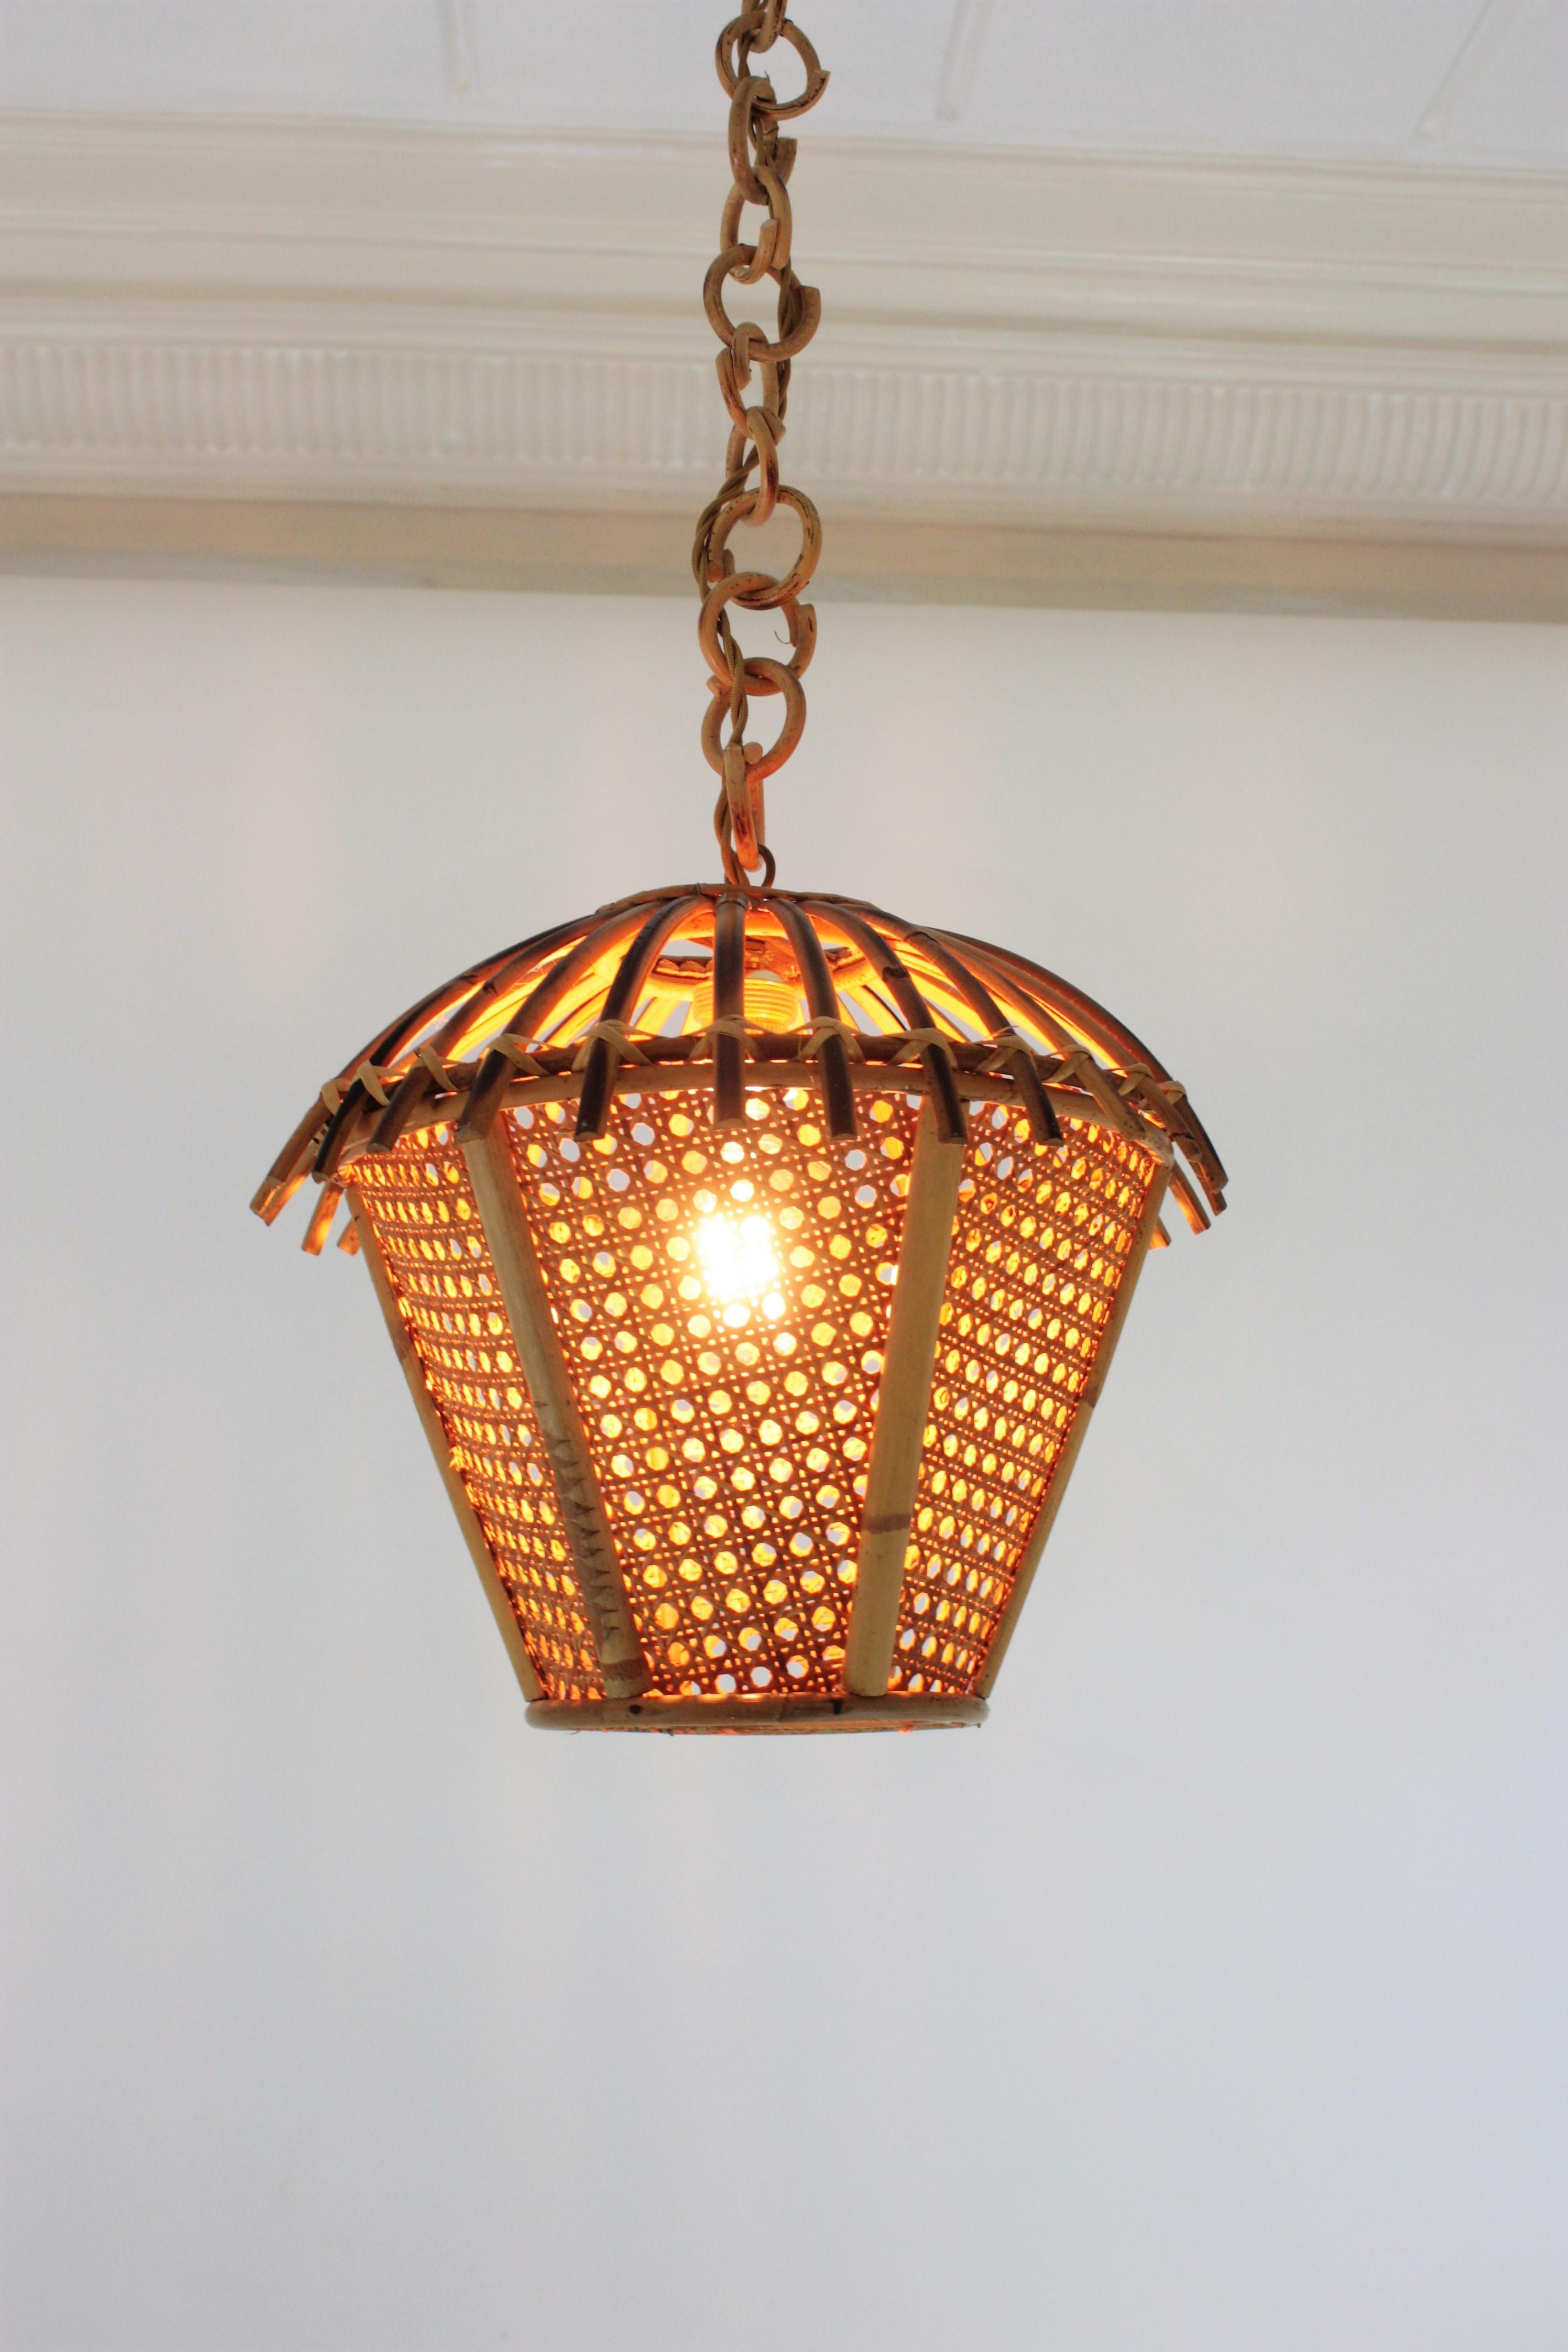 Hand-Crafted Italian Modernist Rattan and Wicker Wire Pagoda Pendant Hanging Light, 1960s For Sale